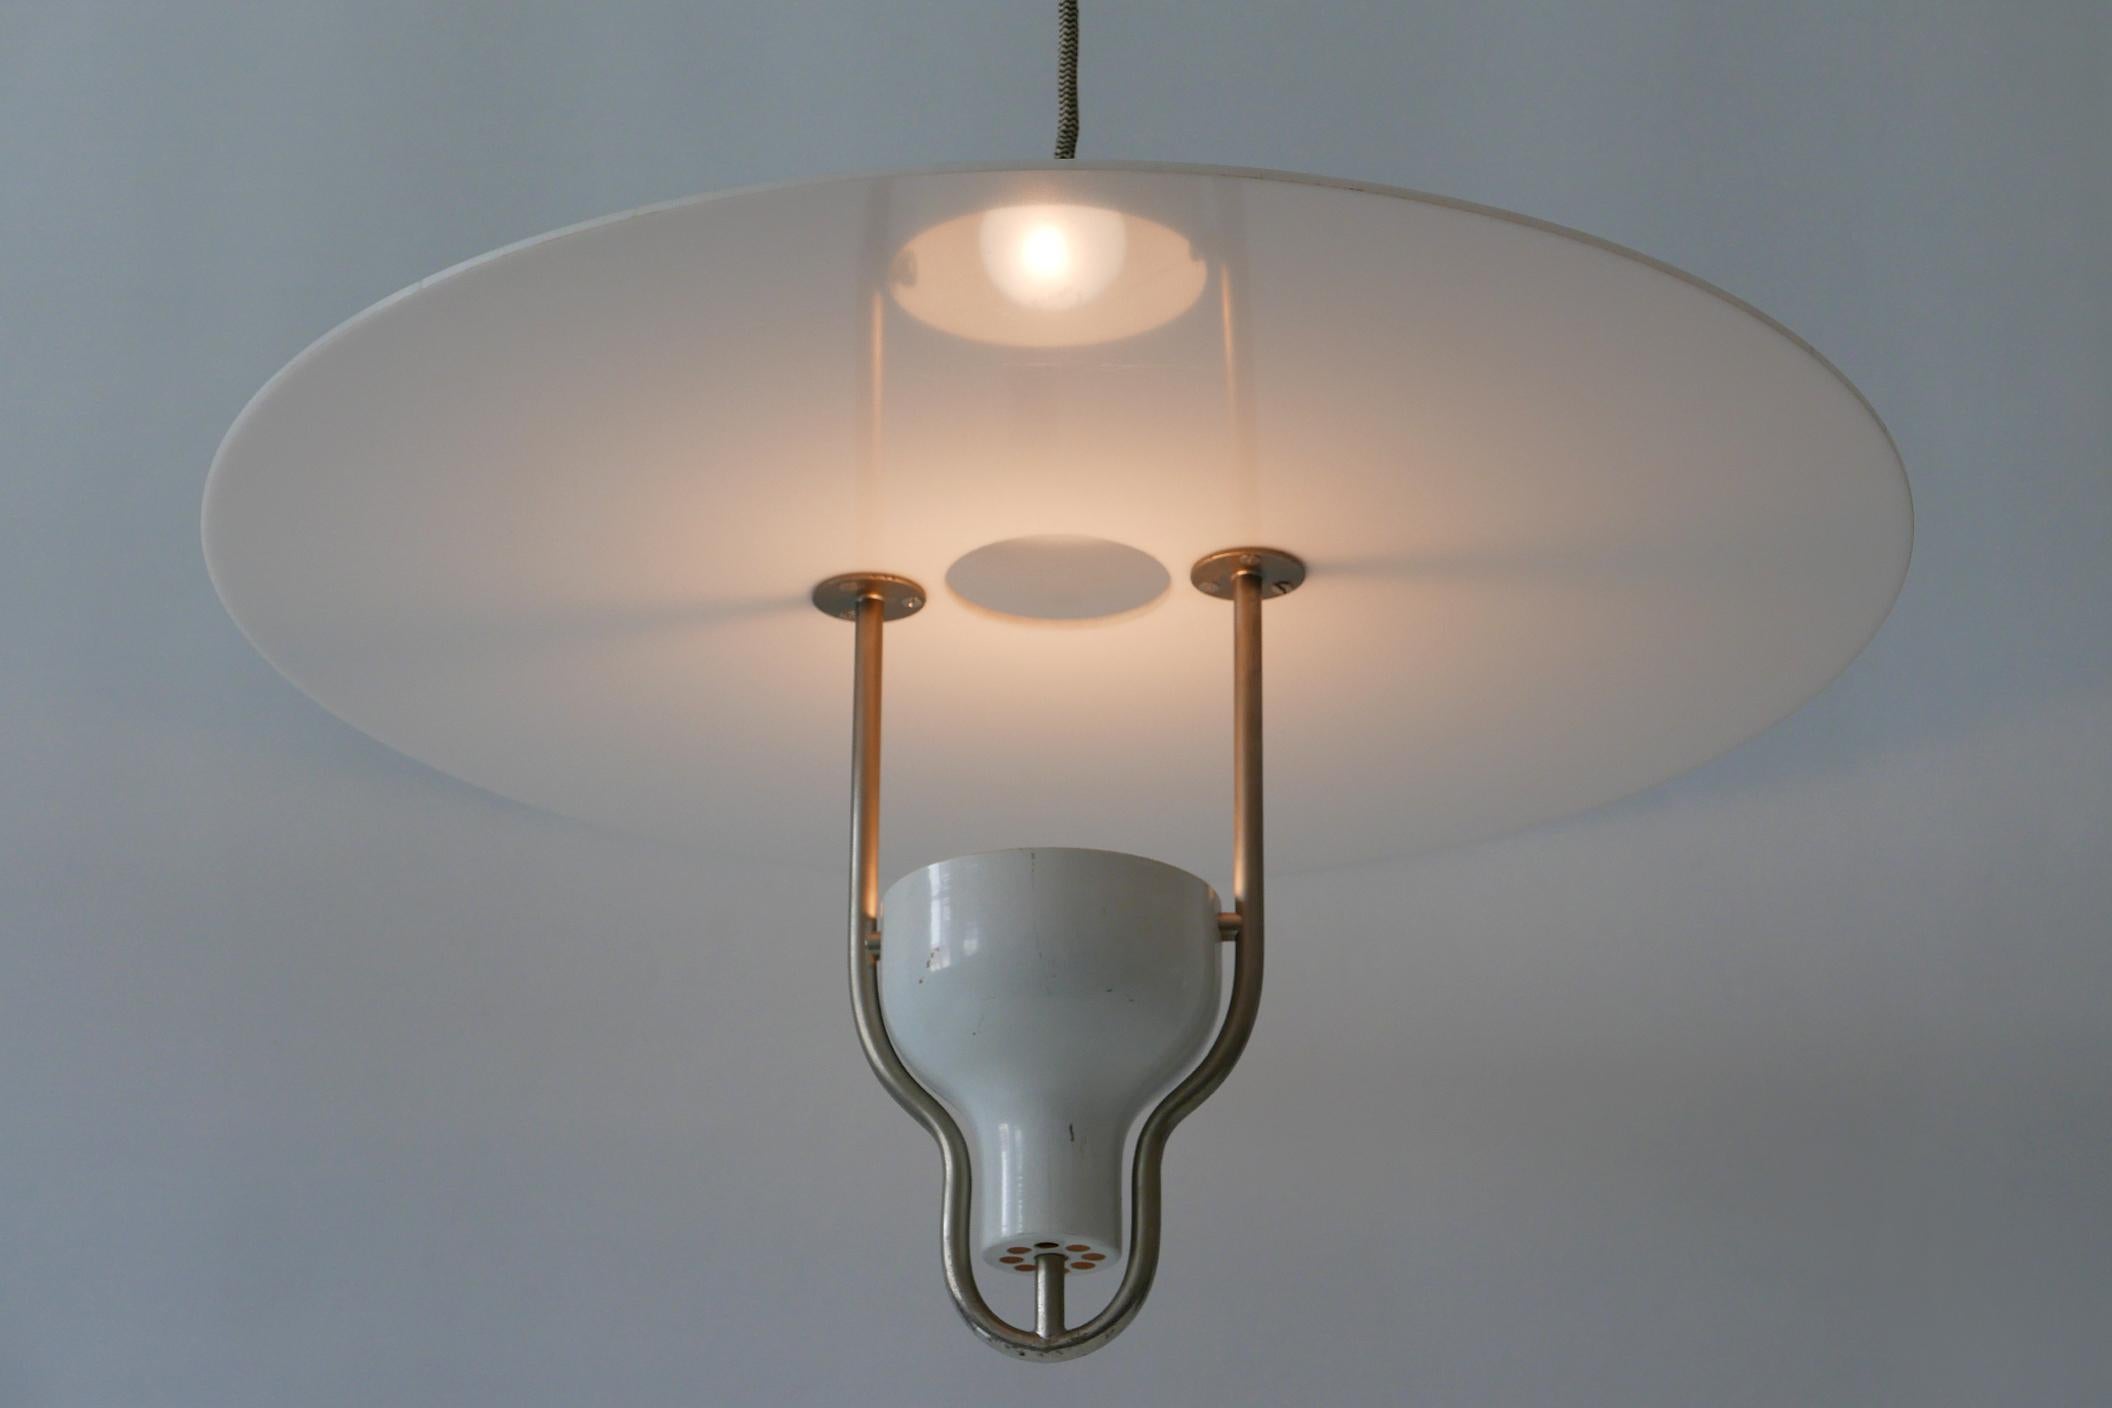 Exceptional Mid-Century Modern Ufo Pendant Lamp, Italy, 1960s For Sale 7